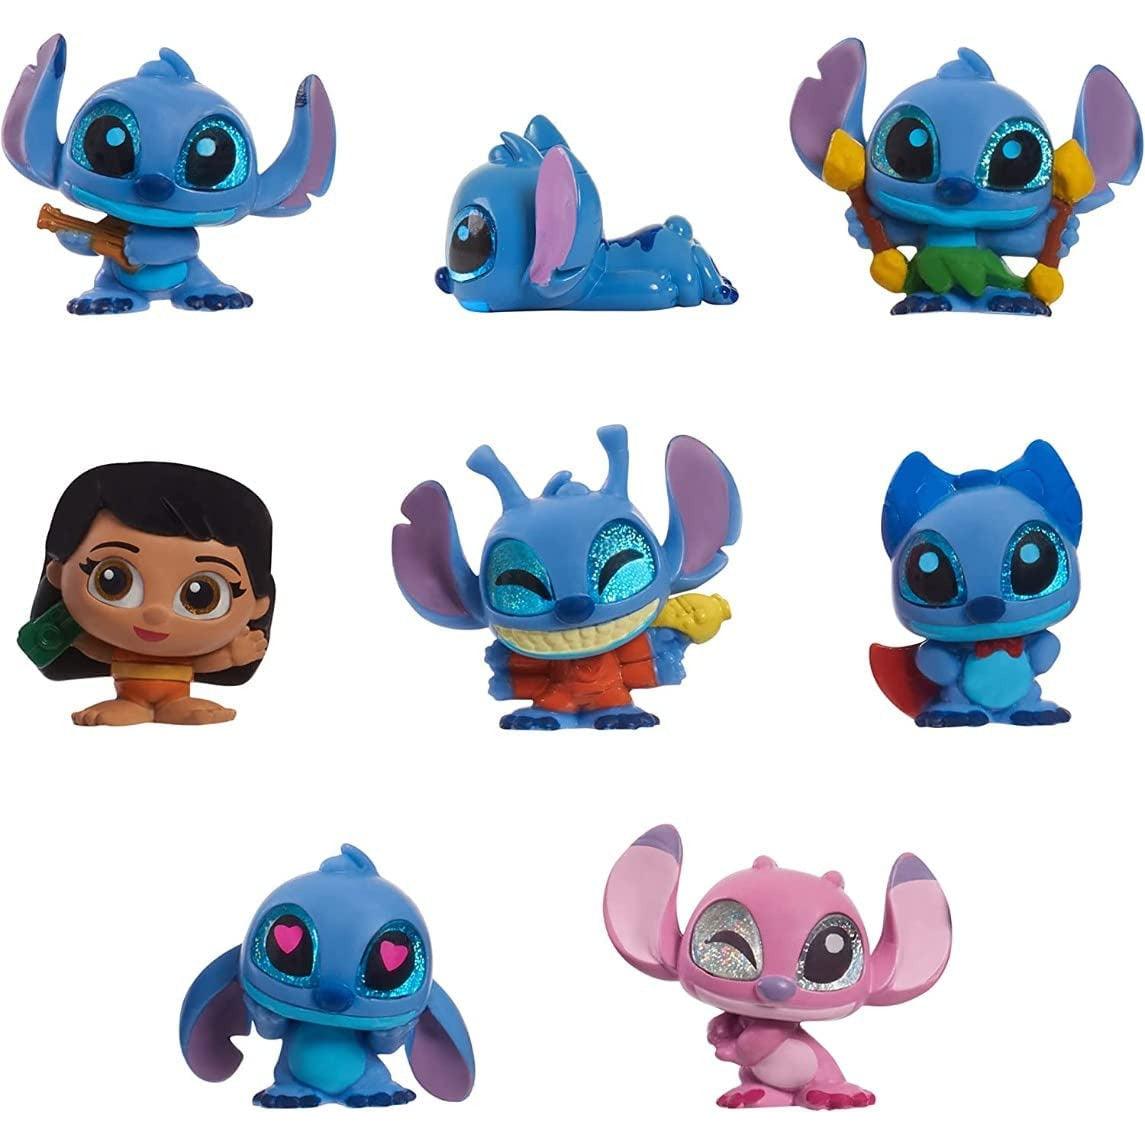 Disney Doorables Stitch Collection Peek, Easter Basket Stuffers - BumbleToys - 2-4 Years, 5-7 Years, collectible, collectors, Disney, Lilo & Stitch, OXE, Pre-Order